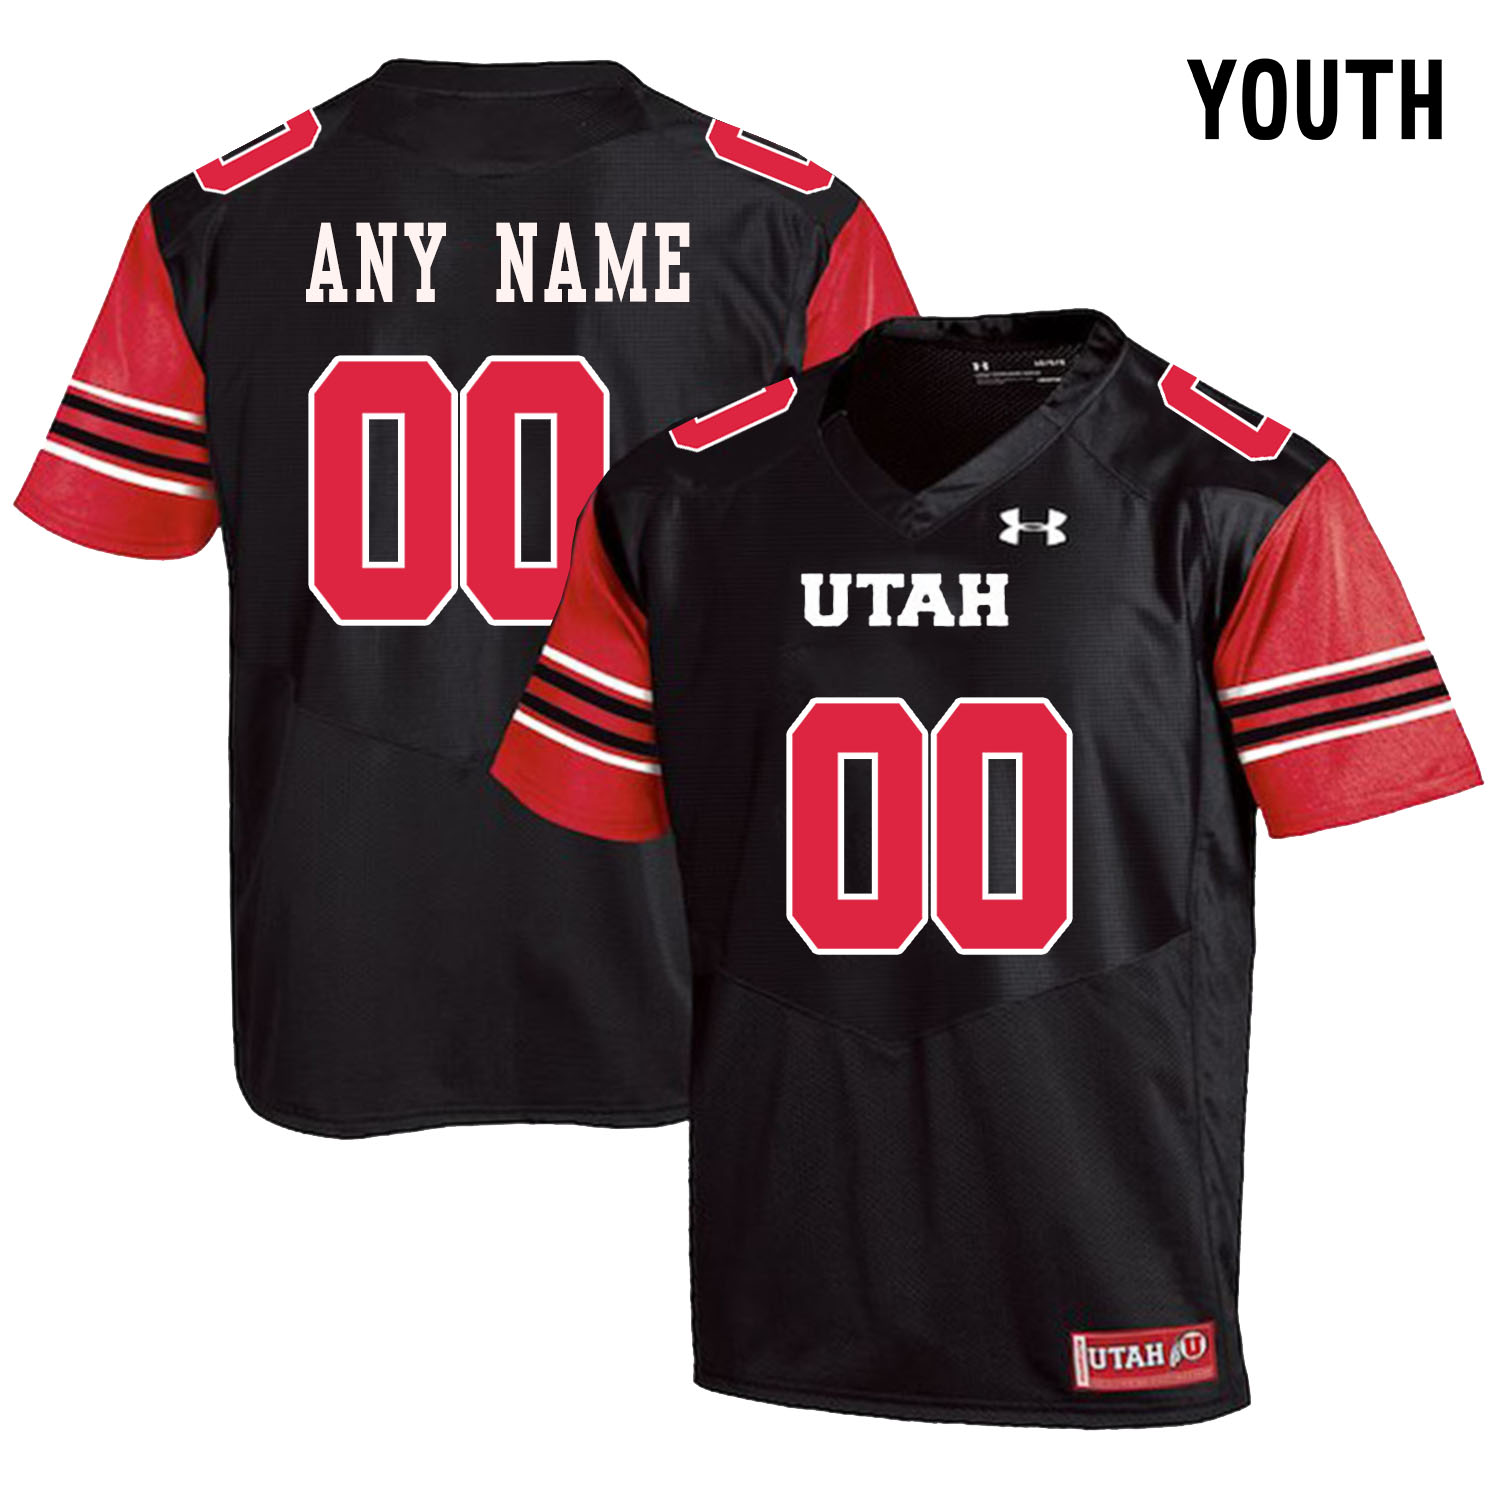 Utah Utes Black Youth's Customized College Football Jersey